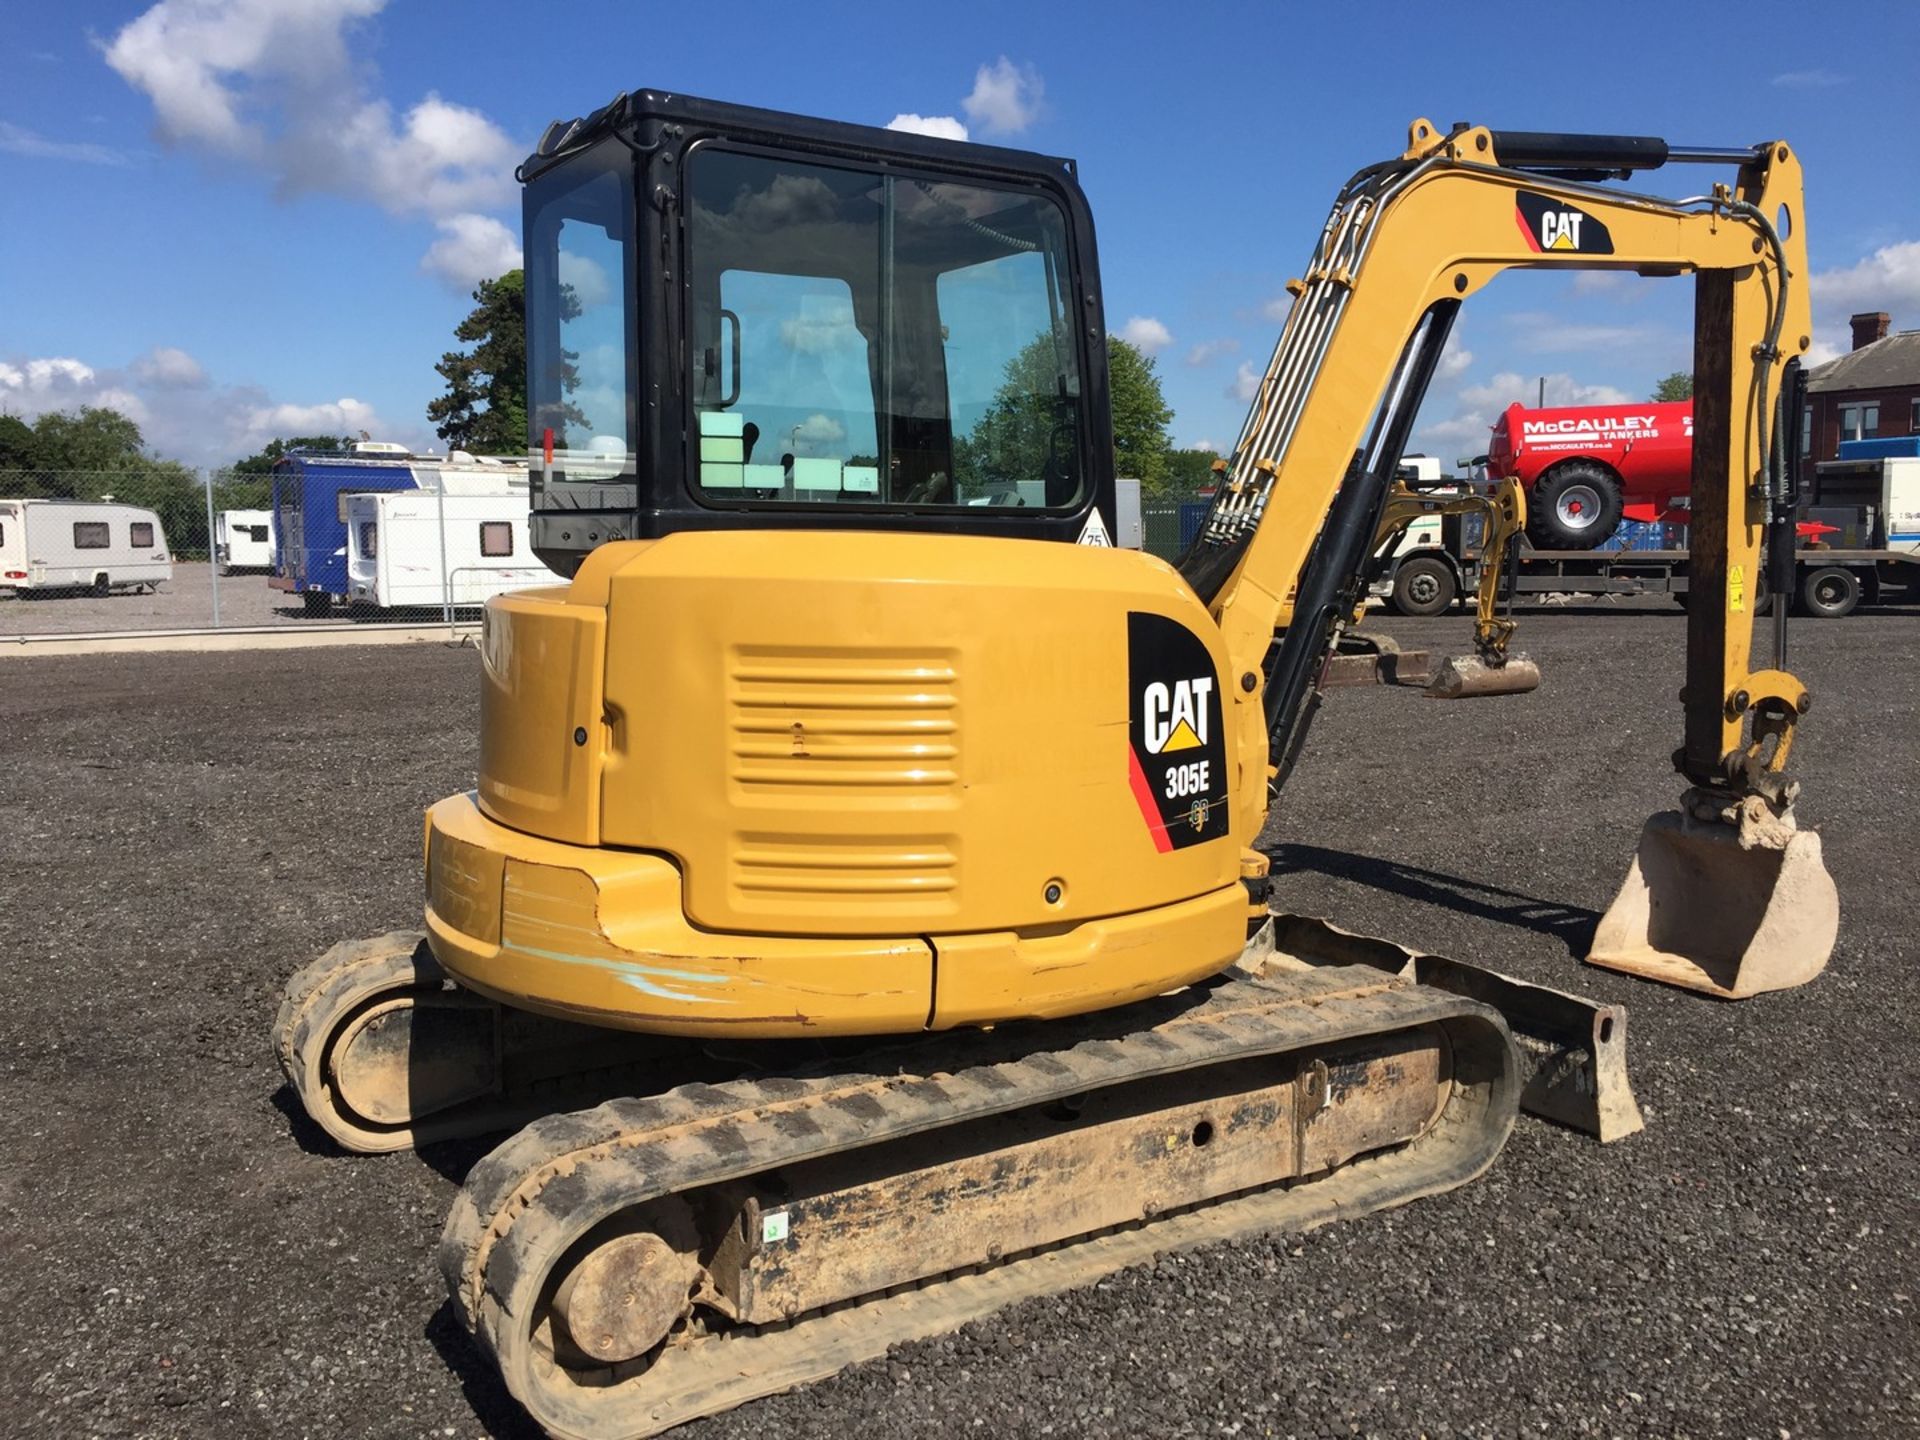 2012, Caterpillar 305 Excavator Serial No. DJX00871, Hrs 3424 approx, 1 x Bucket - Image 16 of 18